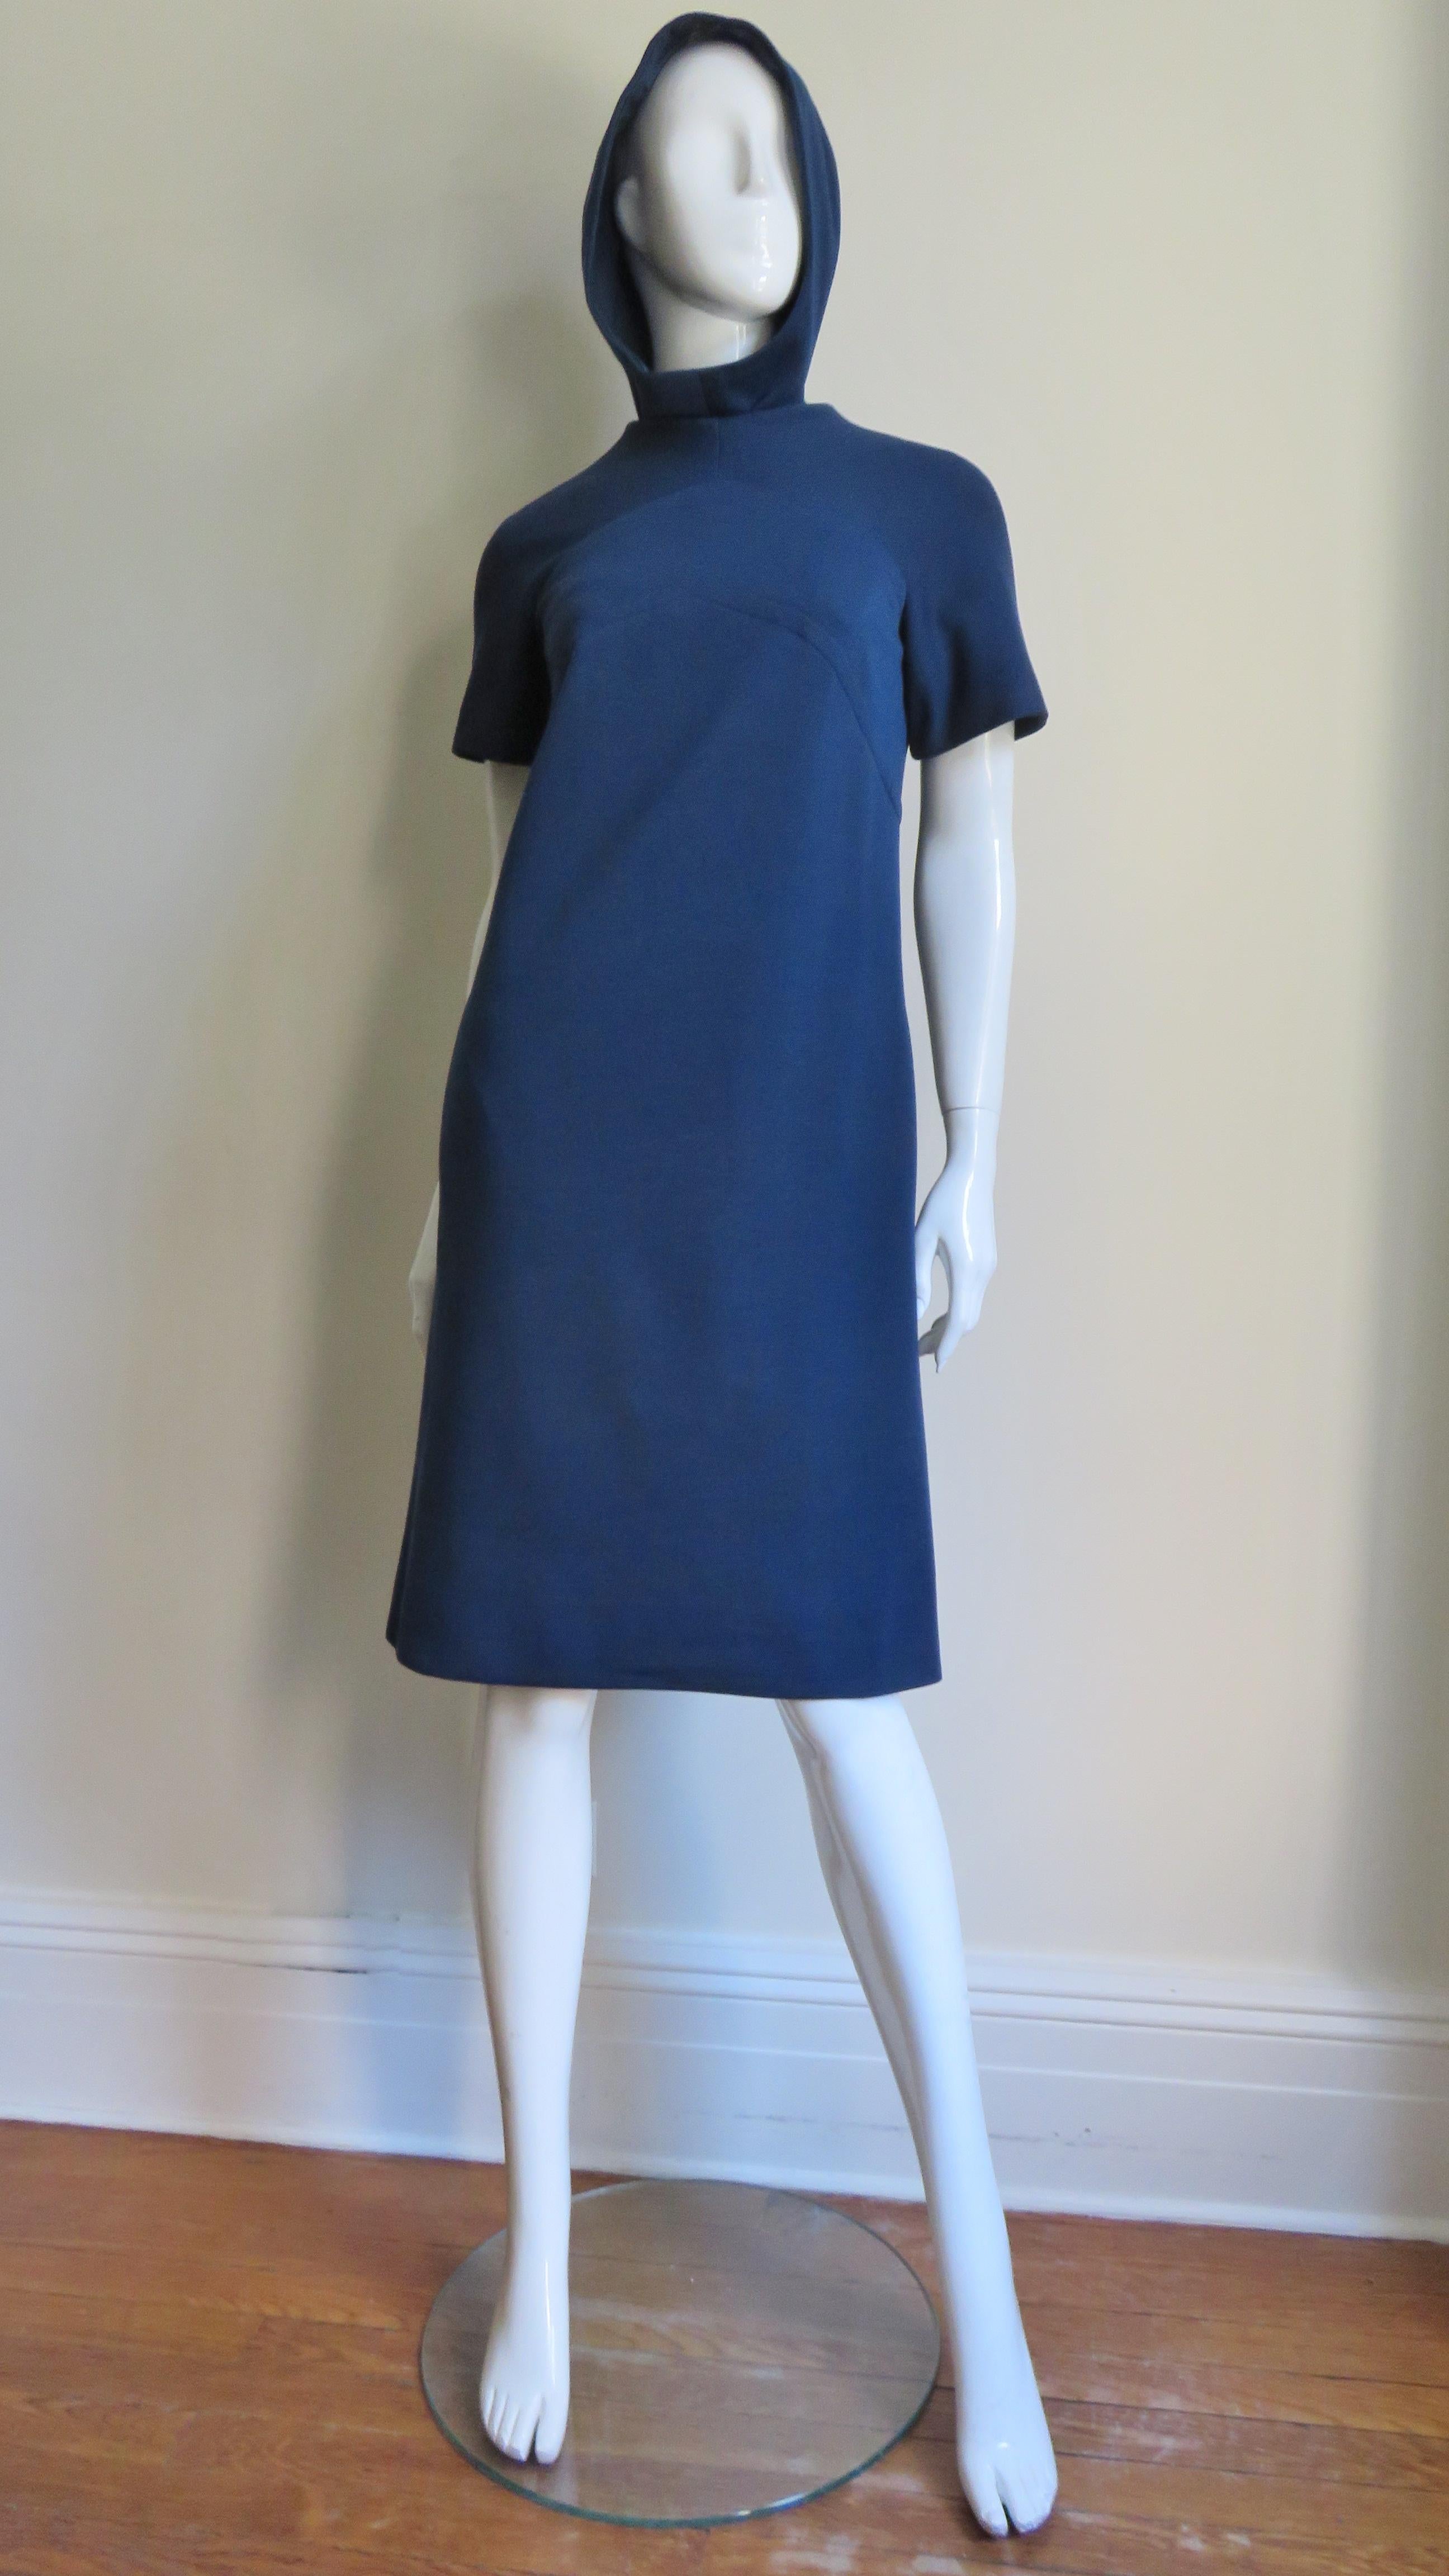  Pauline Trigere 1960s Dress and Hood In Good Condition For Sale In Water Mill, NY